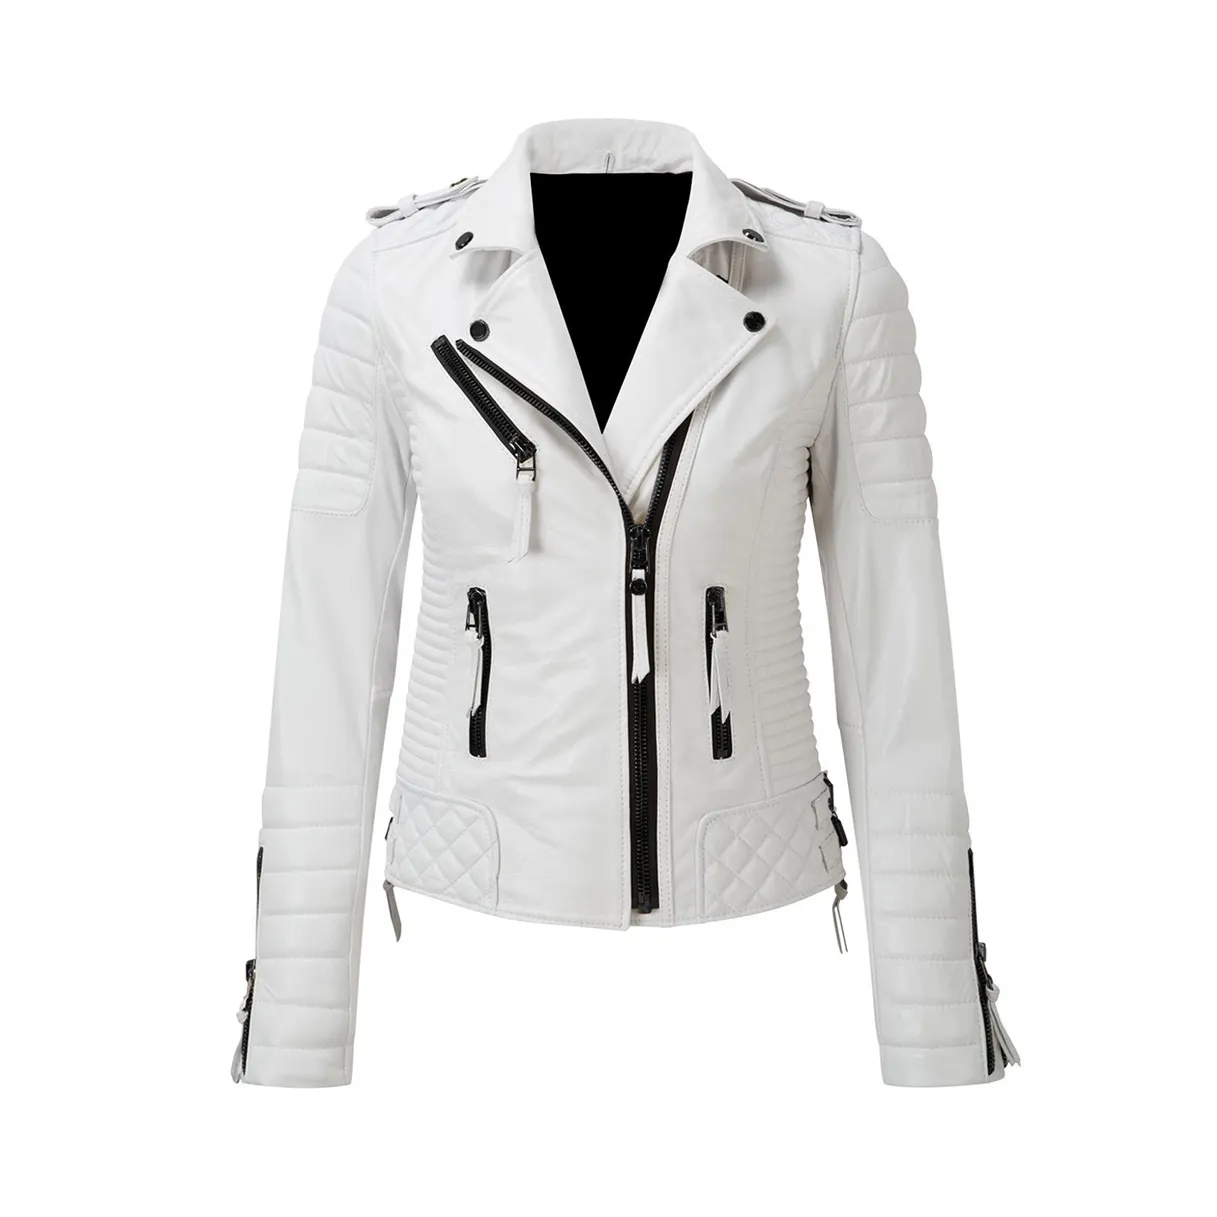 New arrival customized genuine leather pu leather jackets in bulk quantity Cheap price women leather jackets for ladies